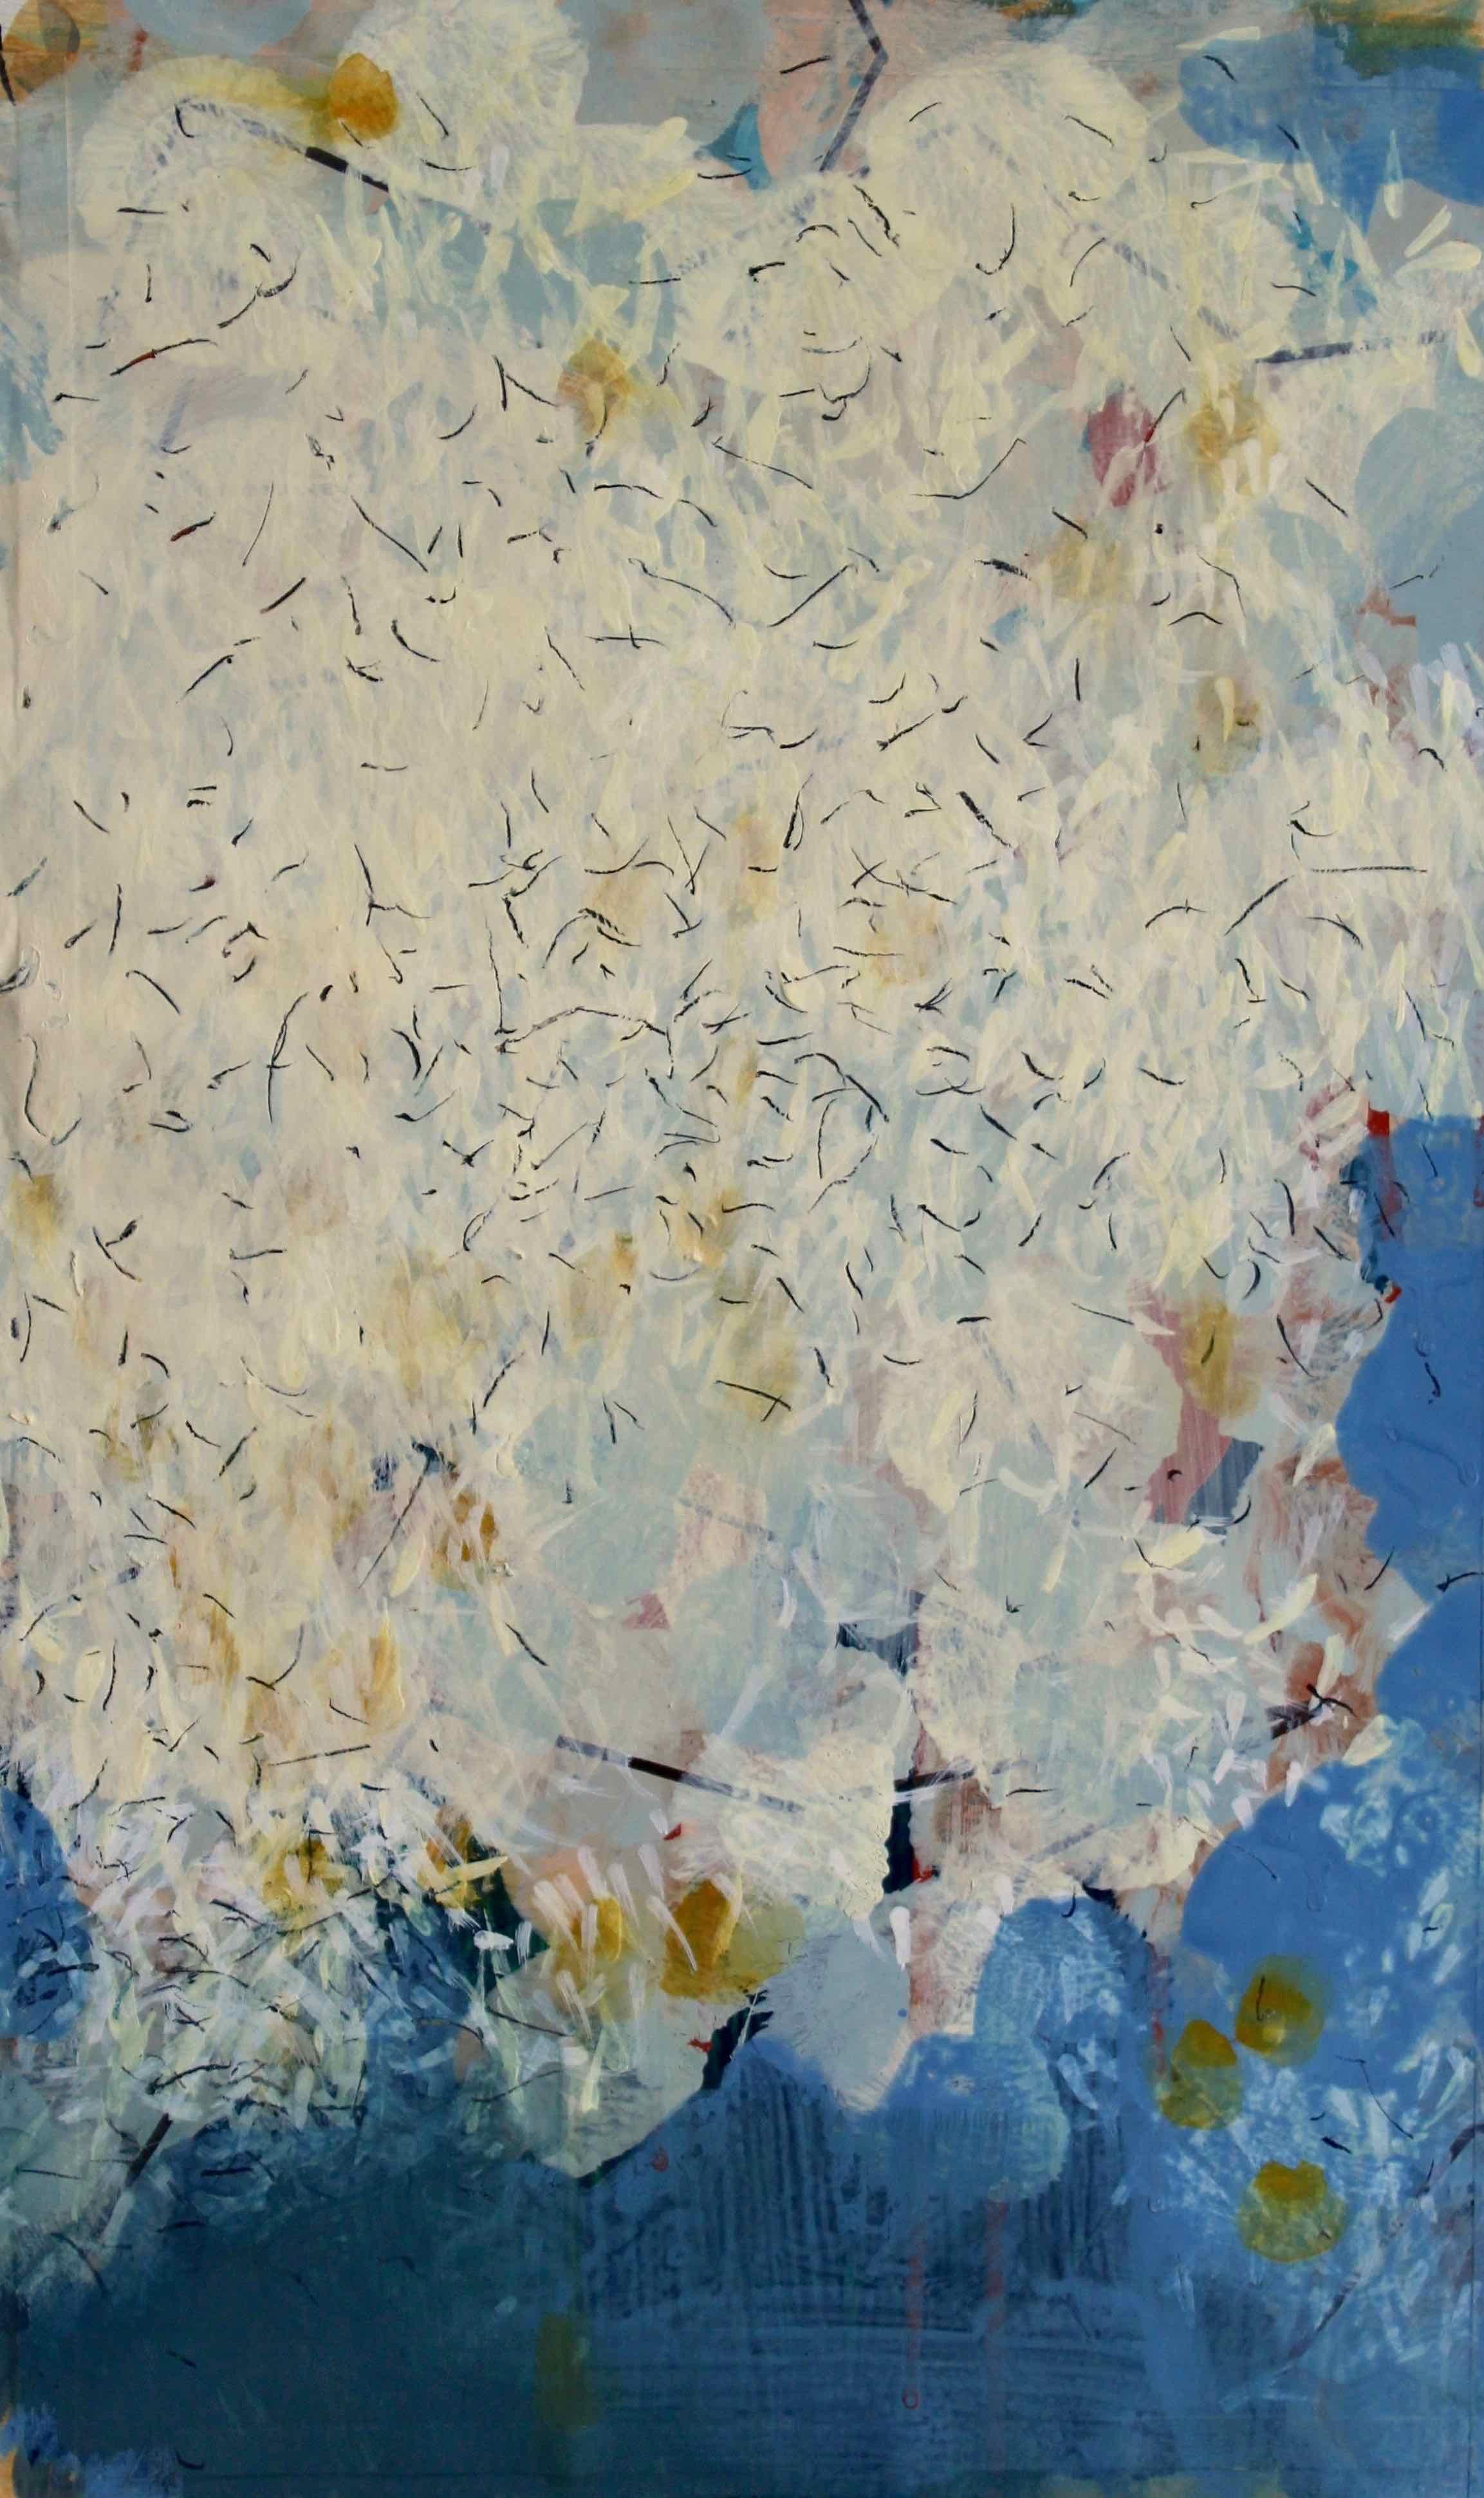 Swarm 2: Painting of a Swarm of White Butterflies by Royal West Academician